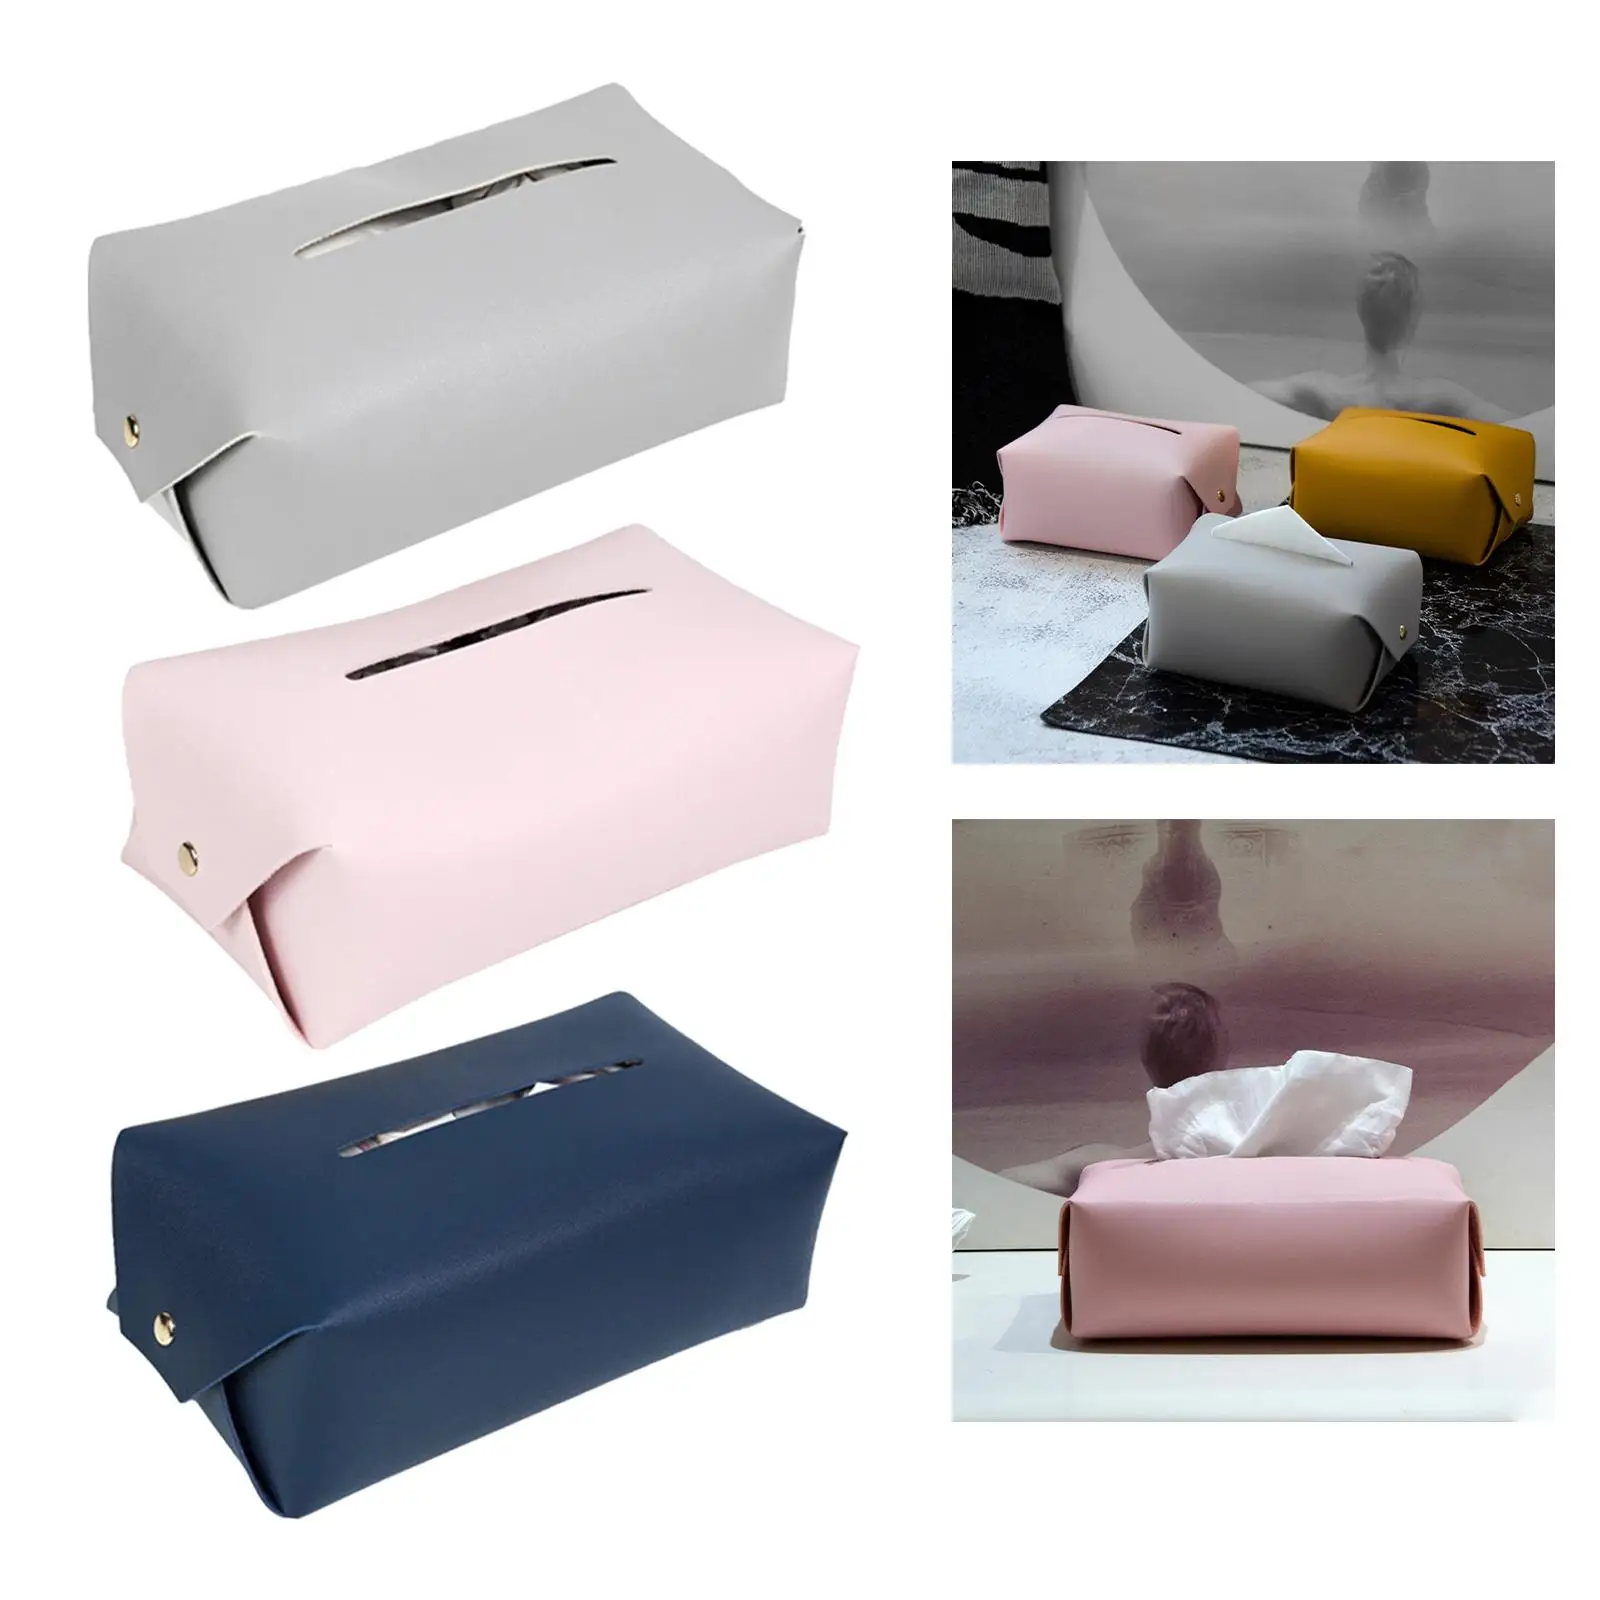 PU Leather Tissue Box Cover Case for Vanity Countertop Living Room Table